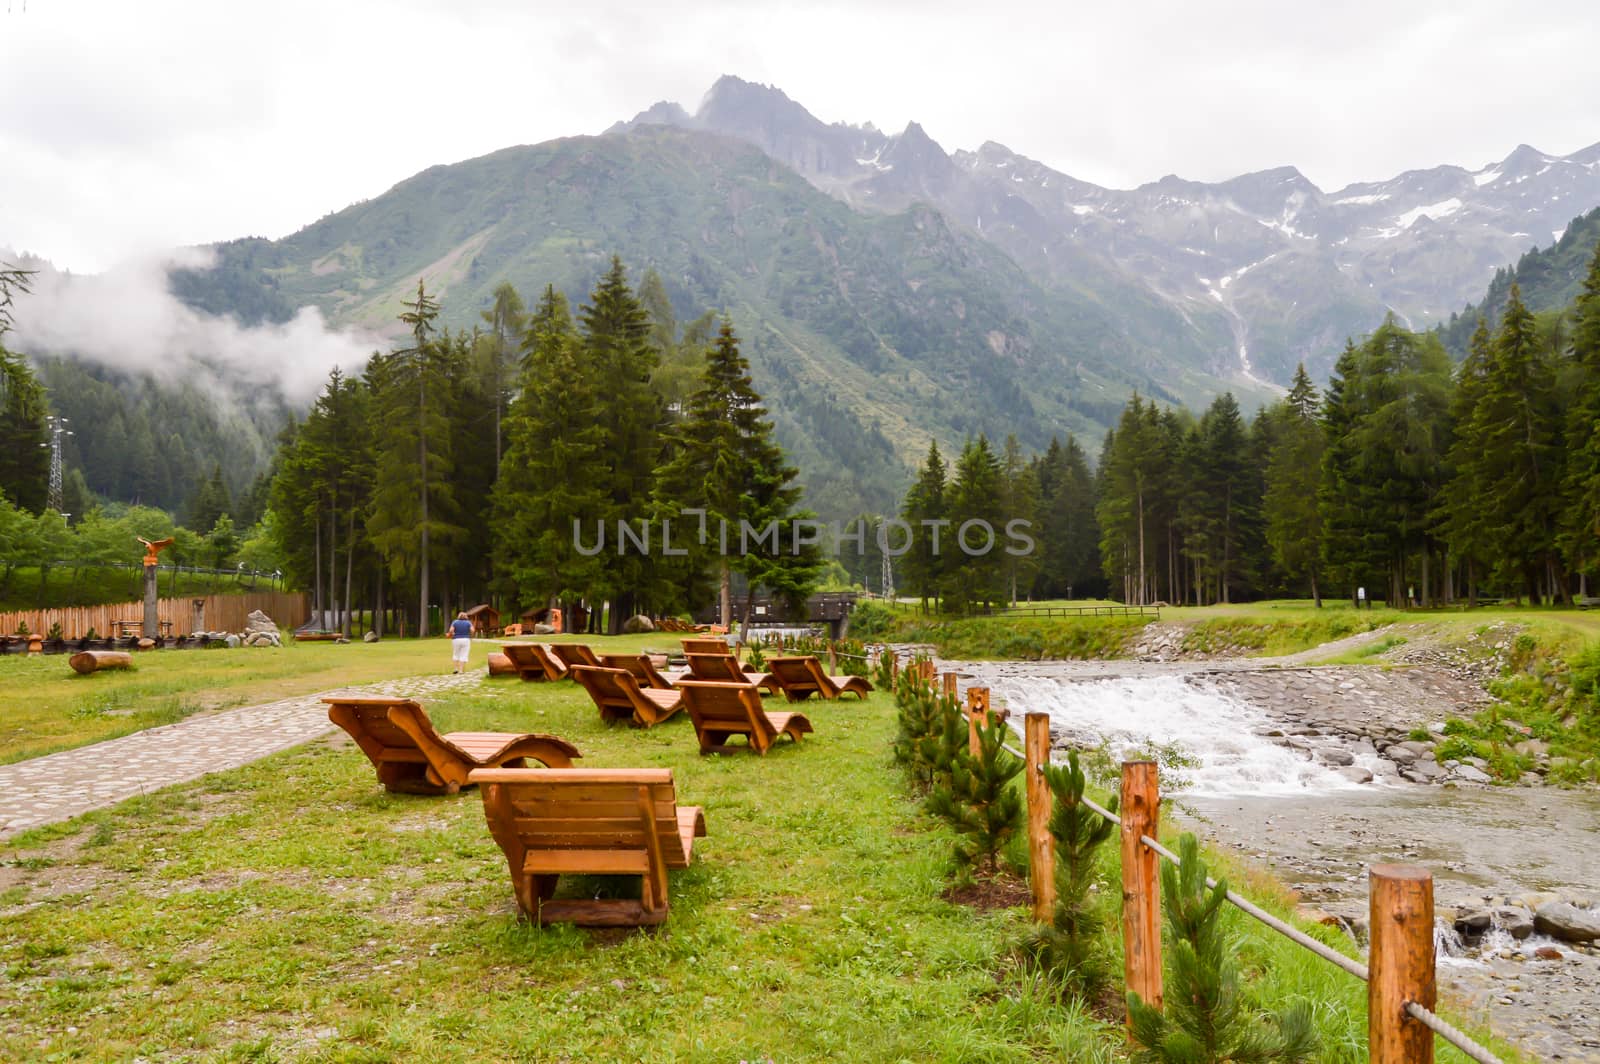 Deck chairs lined up facing the mountain and a torrent in a park in the dolomites in Italy